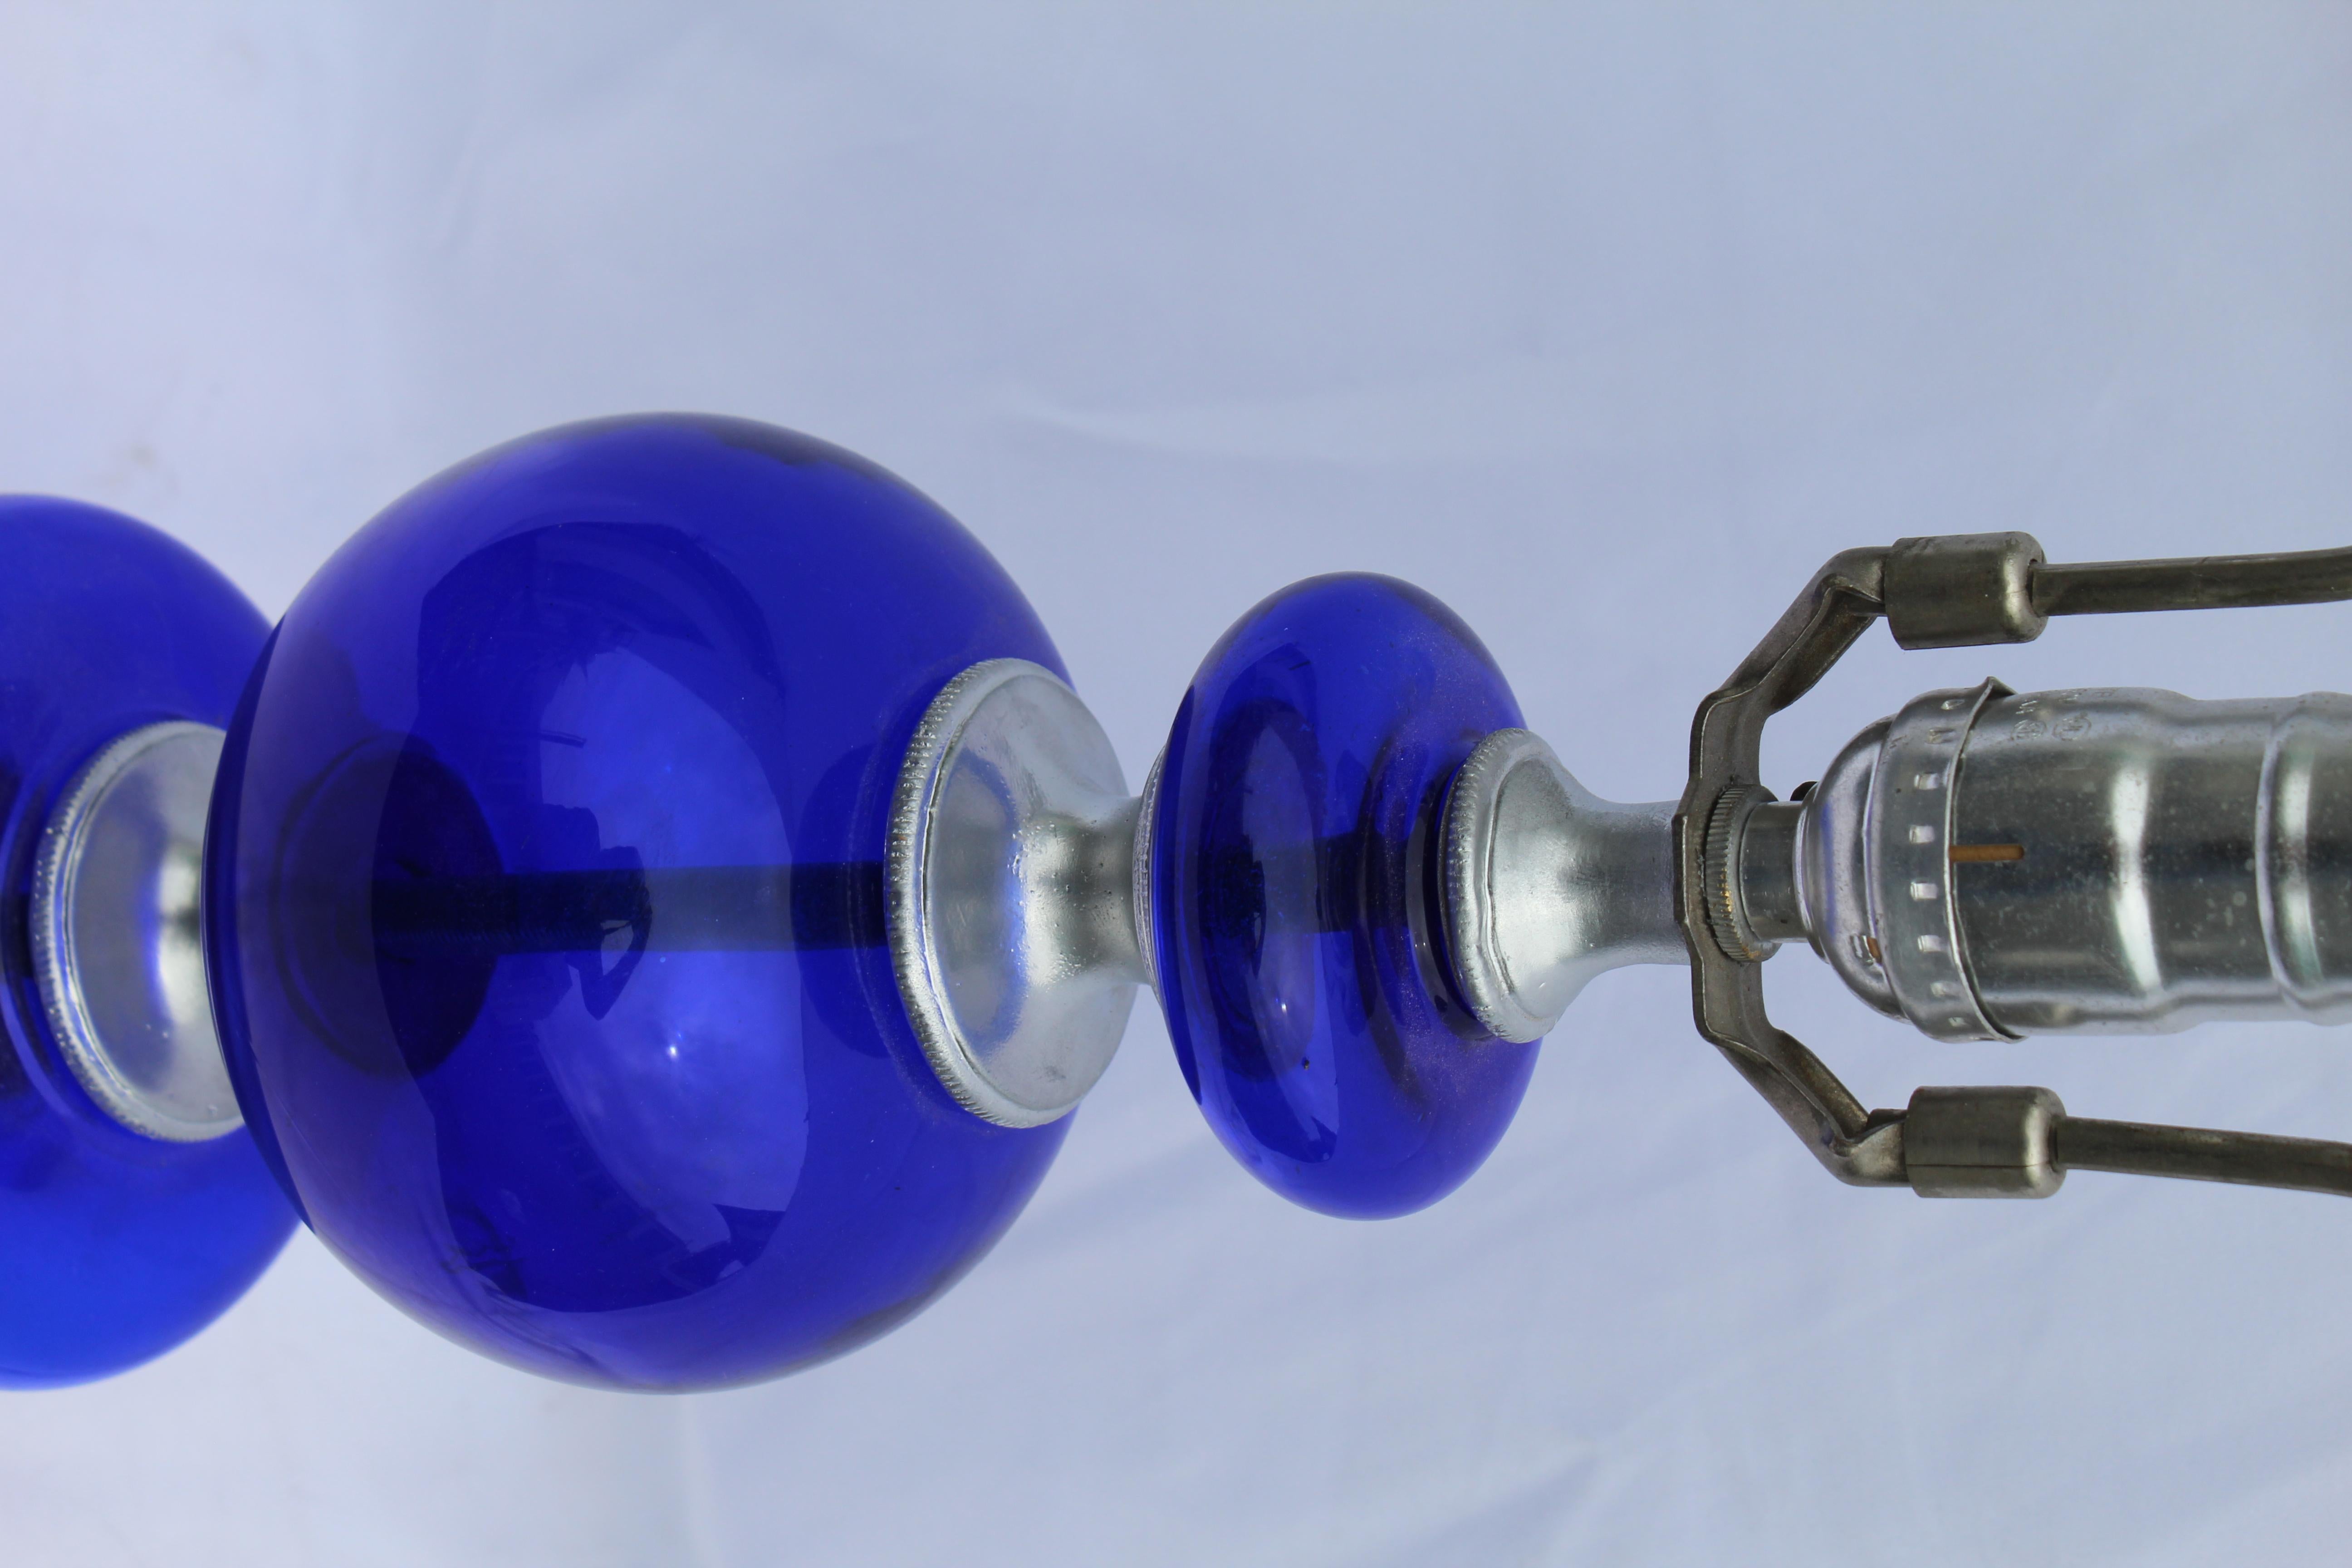 Custom designed cobalt blue glass orbs and balls that were designed by an Interior designer in Los Angeles. The glass spacers are cast bronze and the metal base are all with a painted Silver finish . Has an Edison socket and 10